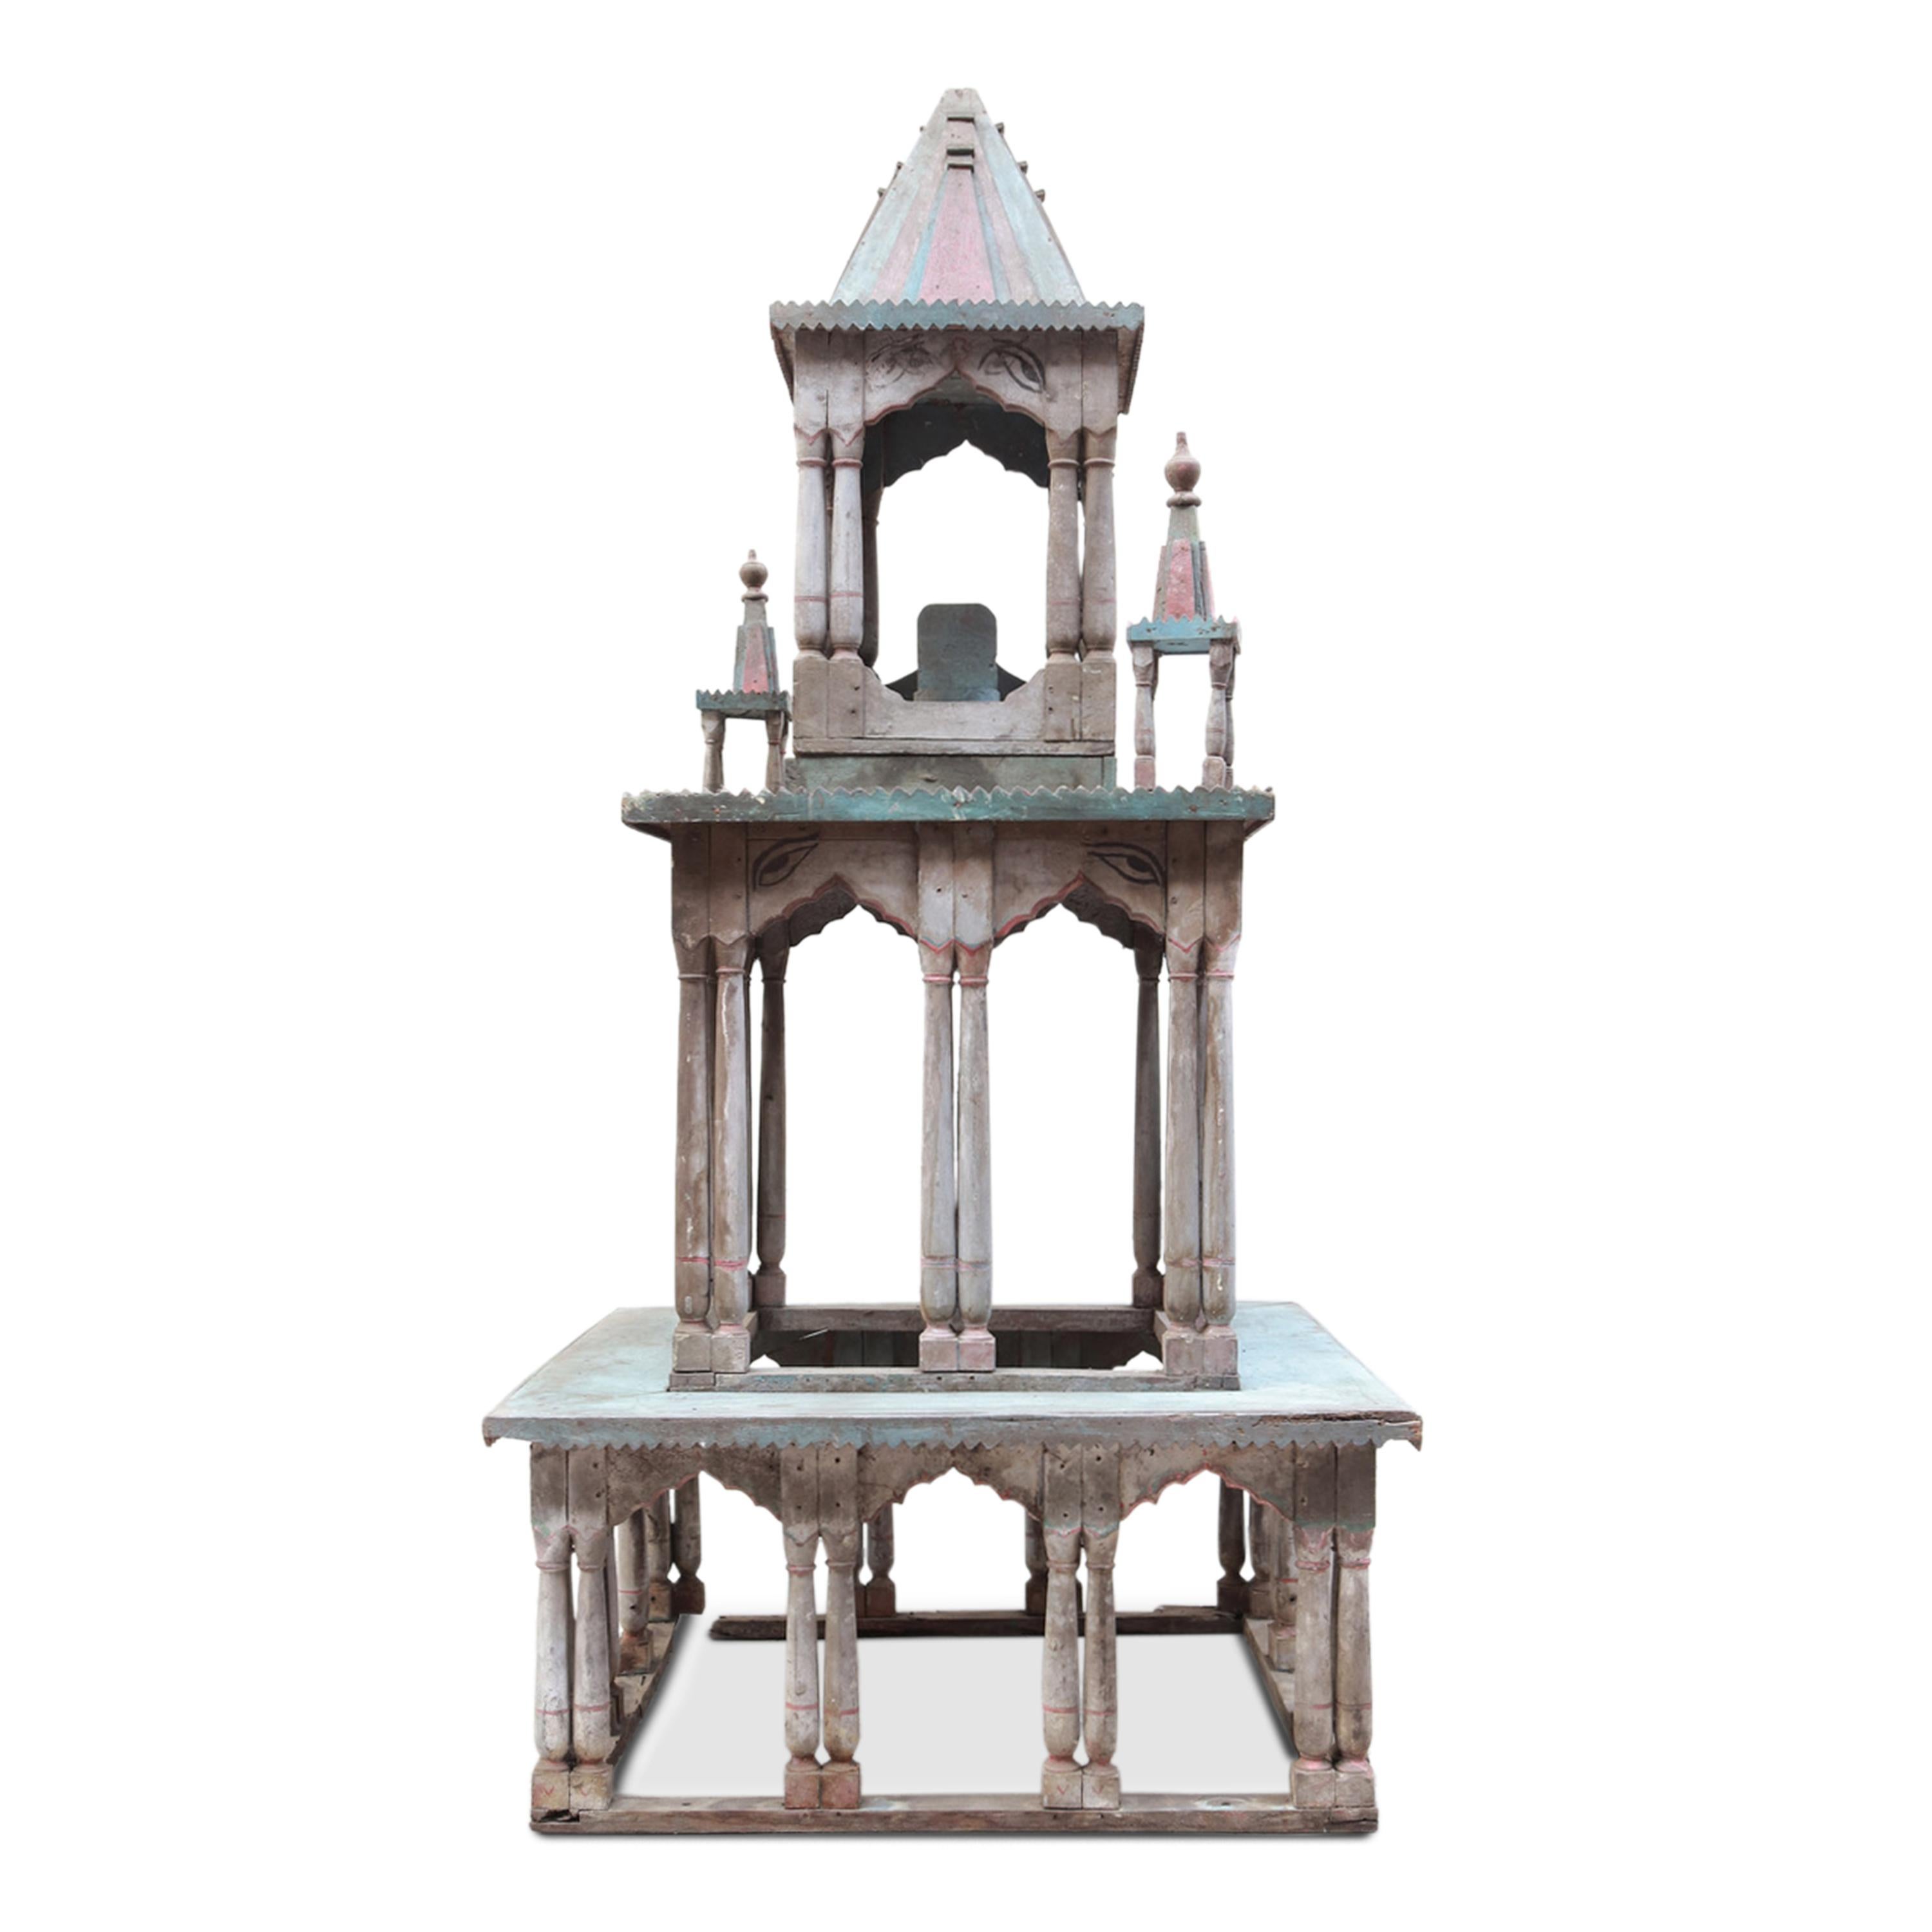 An early 19th-century 3-Tier Indian shrine/altar, featuring its original painted surface and an extremely charming patina earned over time. This shrine offers a glimpse into the rich cultural and religious traditions of India, used in processions